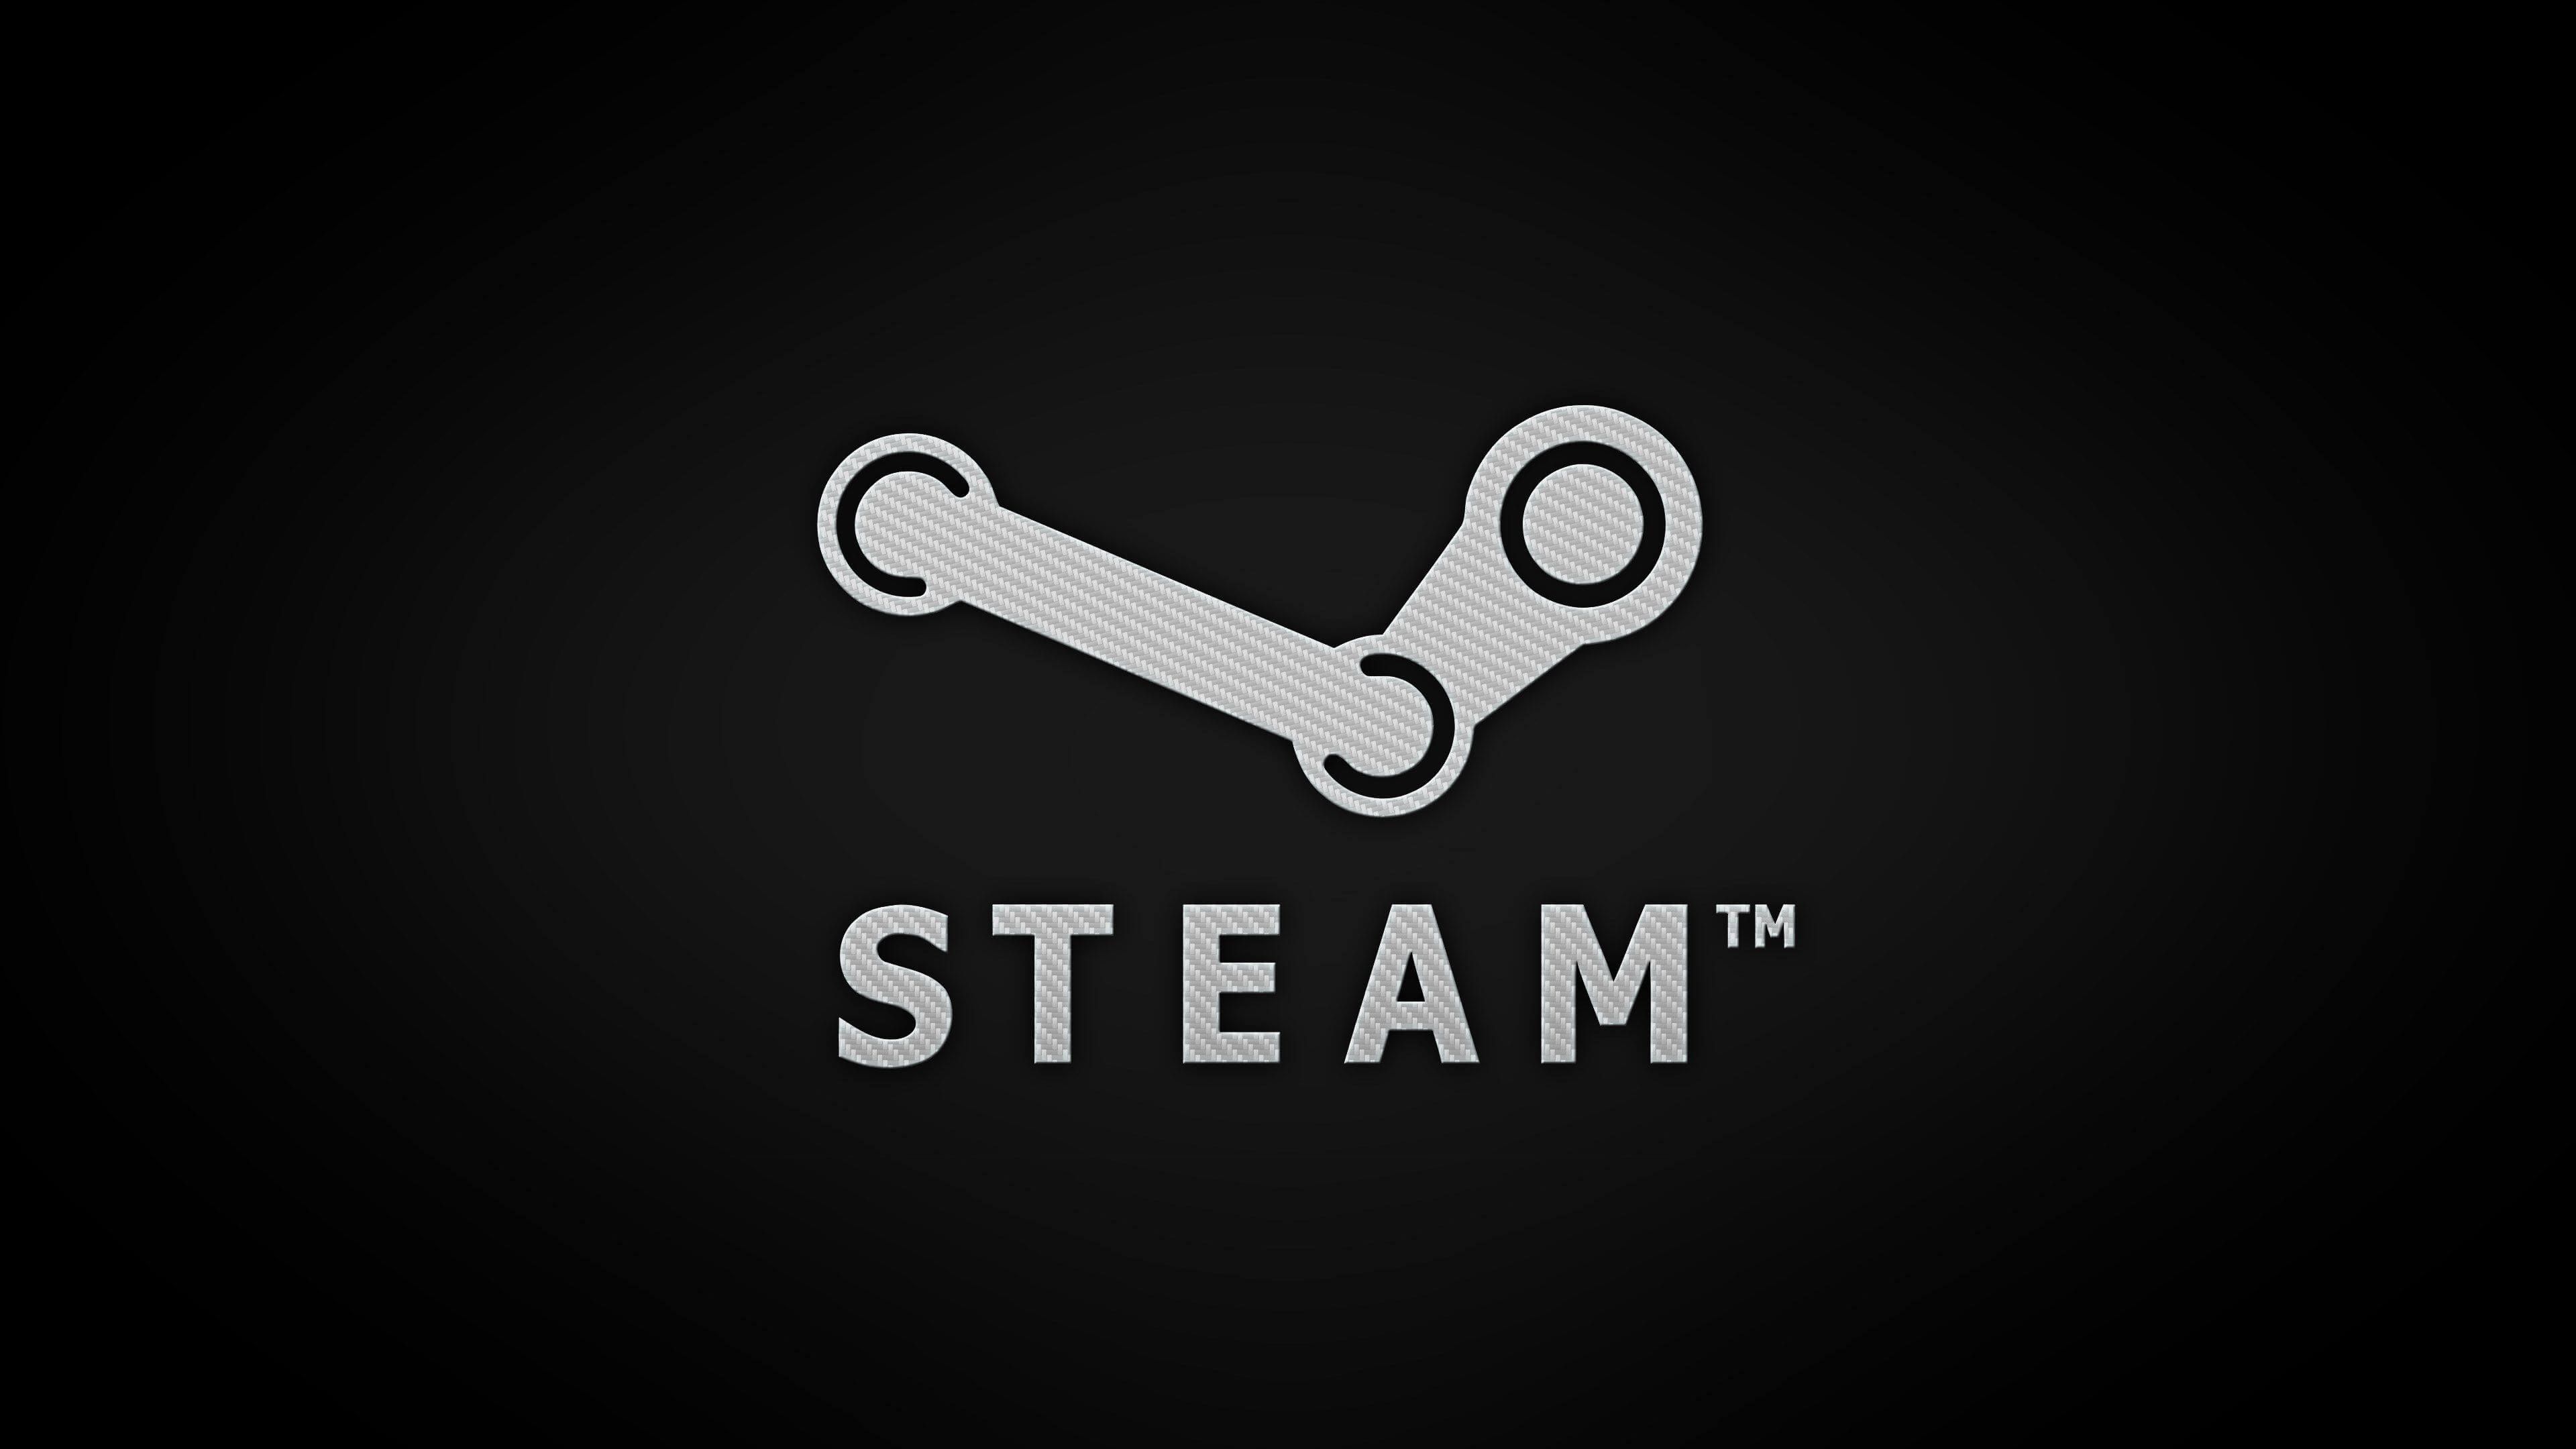 Option to Hide Specific Games is Coming to Steam